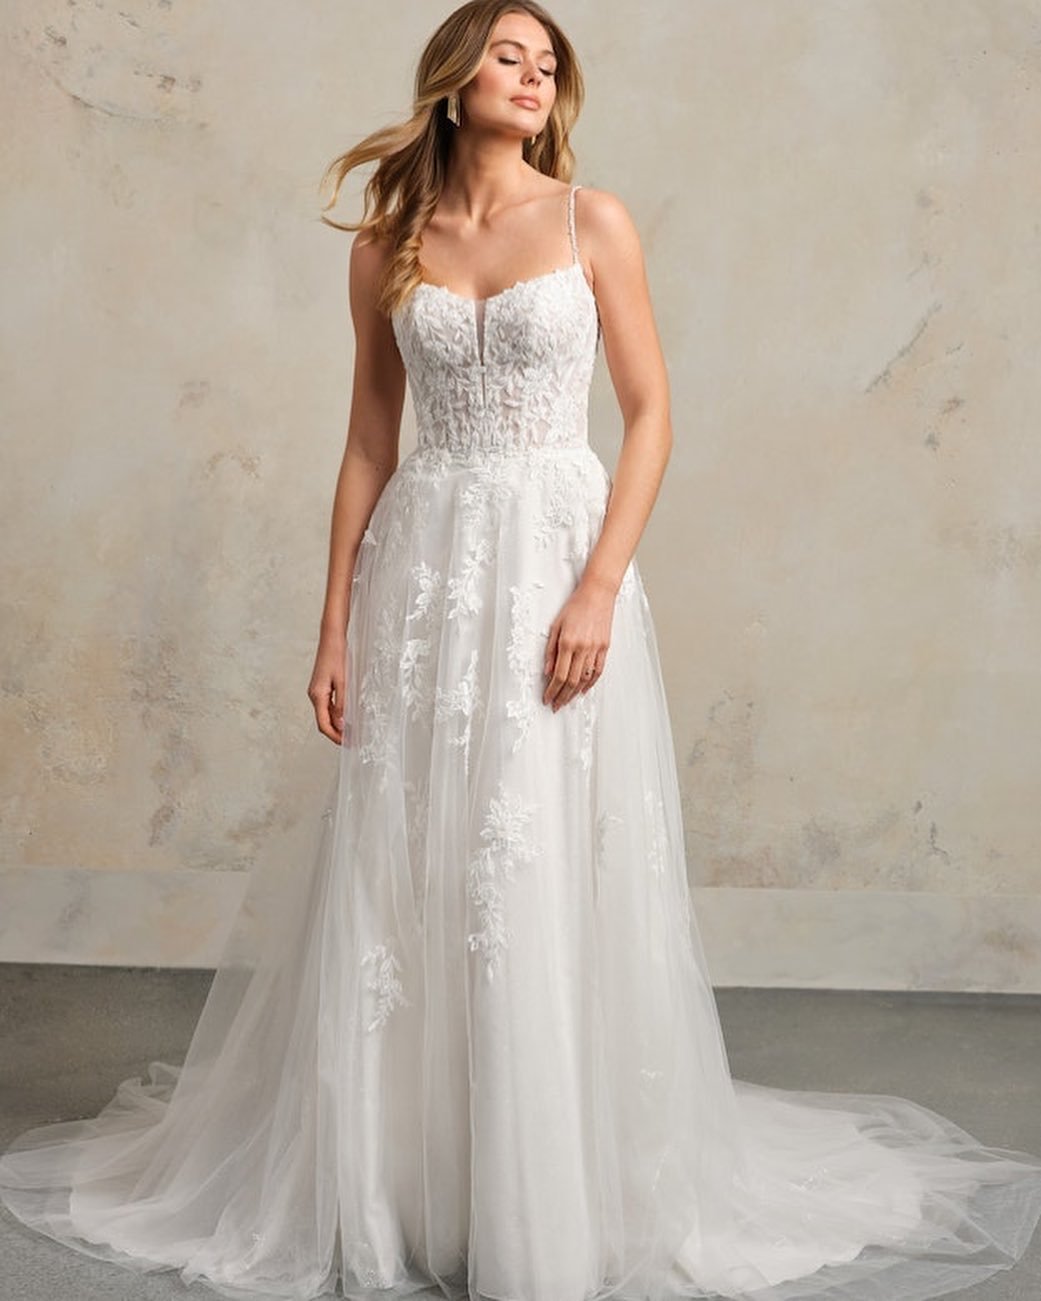 Our newest gown, Catherine, is the sparkly floral a-line you&rsquo;ve been waiting for! She is delicate, soft, and oh-so romantic✨ Beaded spaghetti straps lead into a soft scoop neckline and sheer-organza lined bodice. The skirt is decorated in beade